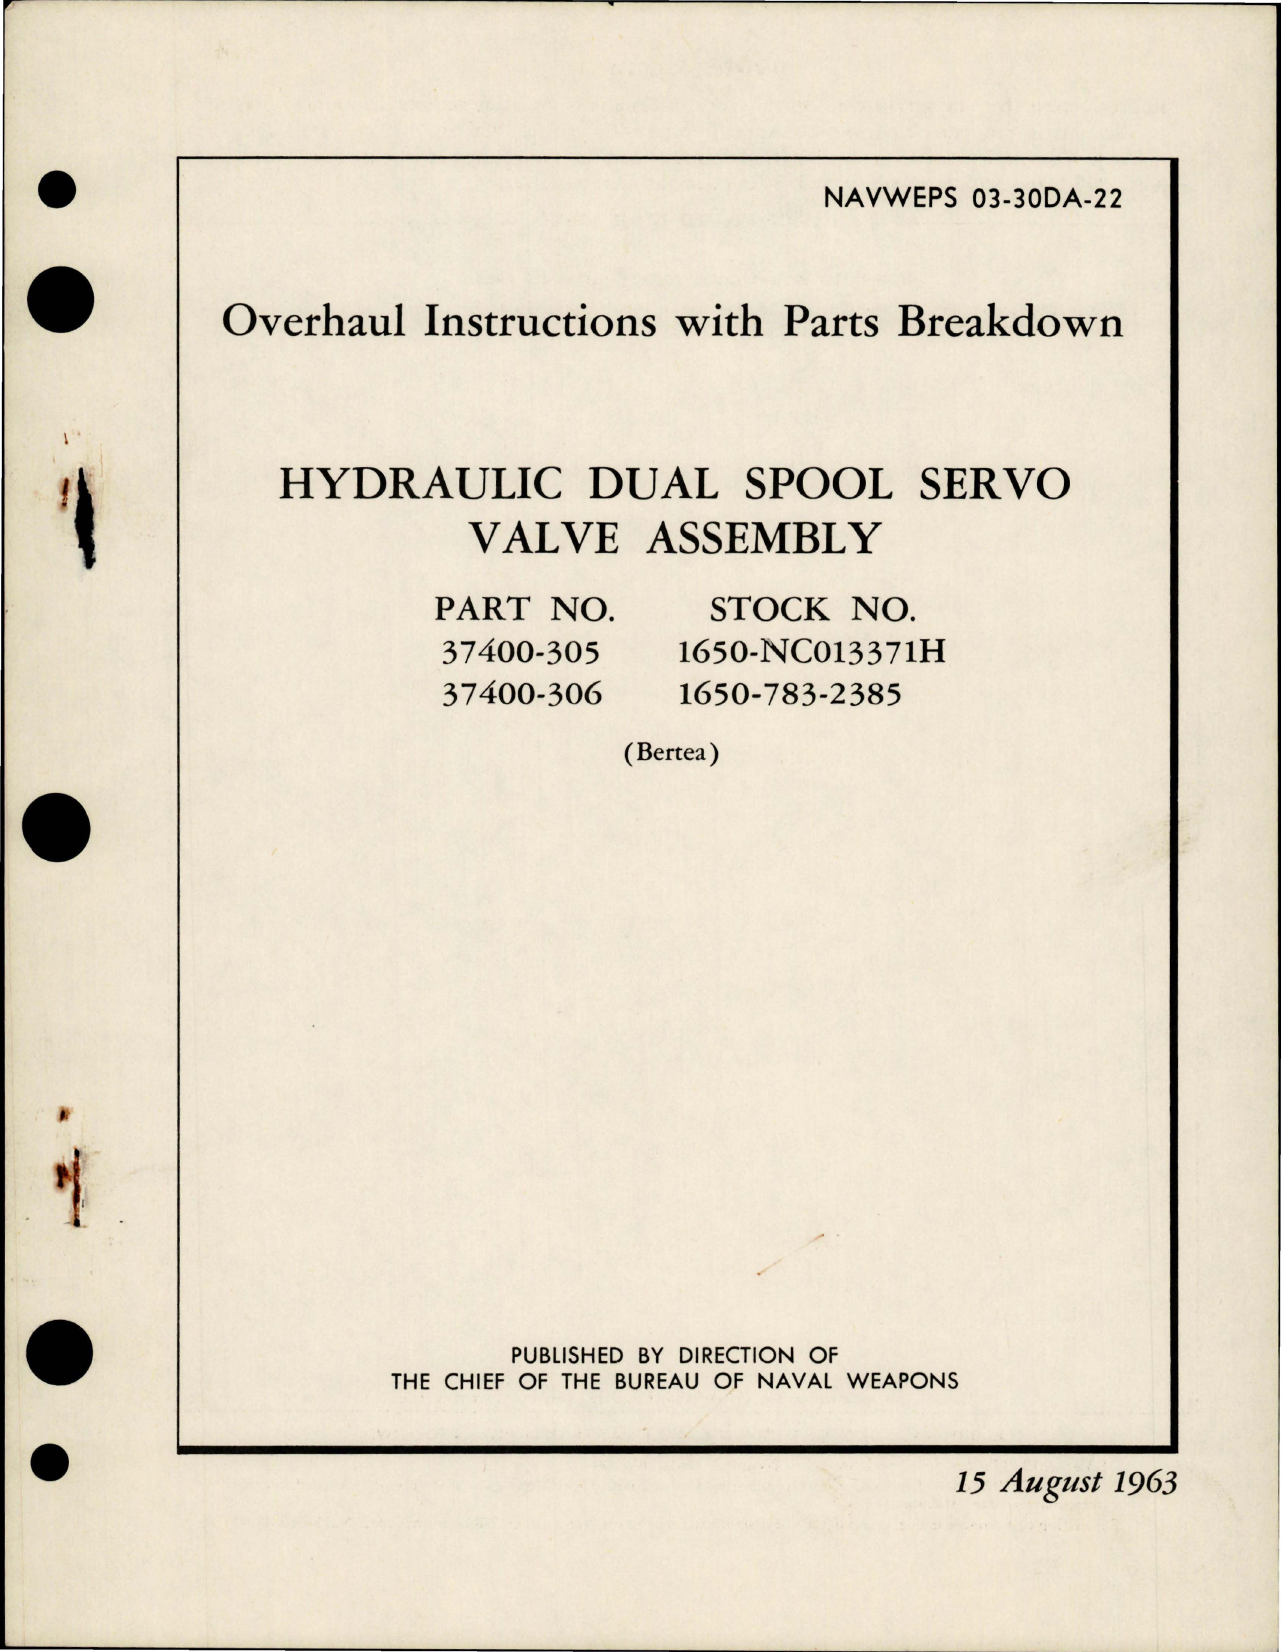 Sample page 1 from AirCorps Library document: Overhaul Instructions with Parts Breakdown for Hydraulic Dual Spool Servo Valve Assembly - Parts 37400-305 and 37400-306 